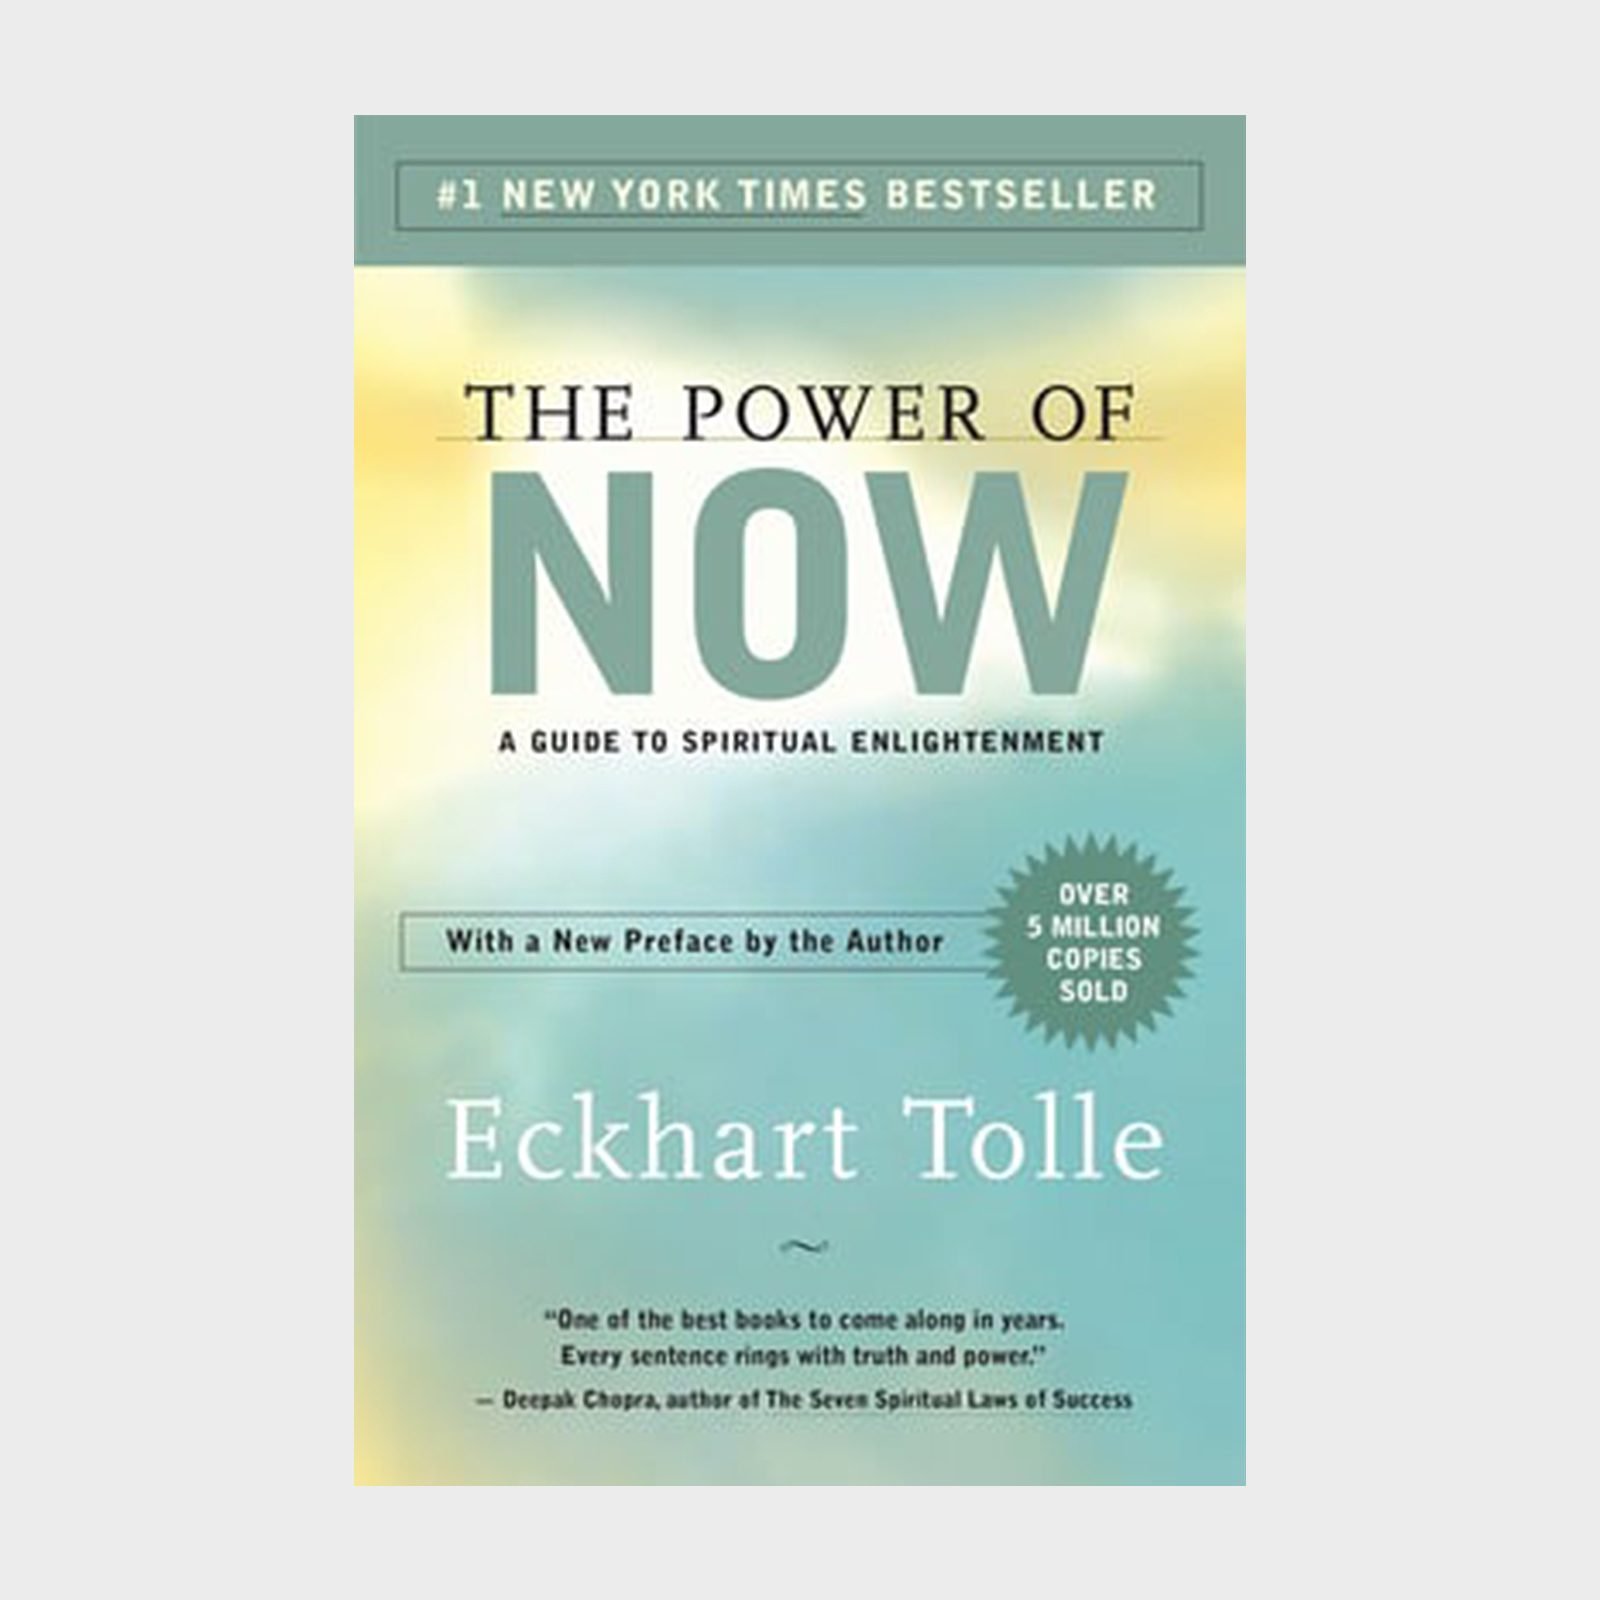 <p>Published in 1997, <em>The Power of Now</em> remains one of the most sought-after and paradigm-shifting personal-growth books. Eckhart Tolle is a spiritual teacher who emphasizes being present and letting go of ego. Oprah lists it as one of her "Super Soulful Reads," contributing to its staying power. For anyone who is interested in spirituality and open to learning from a range of spiritual practices, from Buddhism to Christianity, this book will be an enlivening addition to your bookshelf. Not sure what type of book you're in the mood for? These are the <a href="https://www.rd.com/list/book-for-your-zodiac-sign/">best books for you, based on your zodiac sign</a>.</p> <p class="listicle-page__cta-button-shop"><a class="shop-btn" href="https://bookshop.org/books/the-power-of-now-a-guide-to-spiritual-enlightenment/9781577314806">Shop Now</a></p>